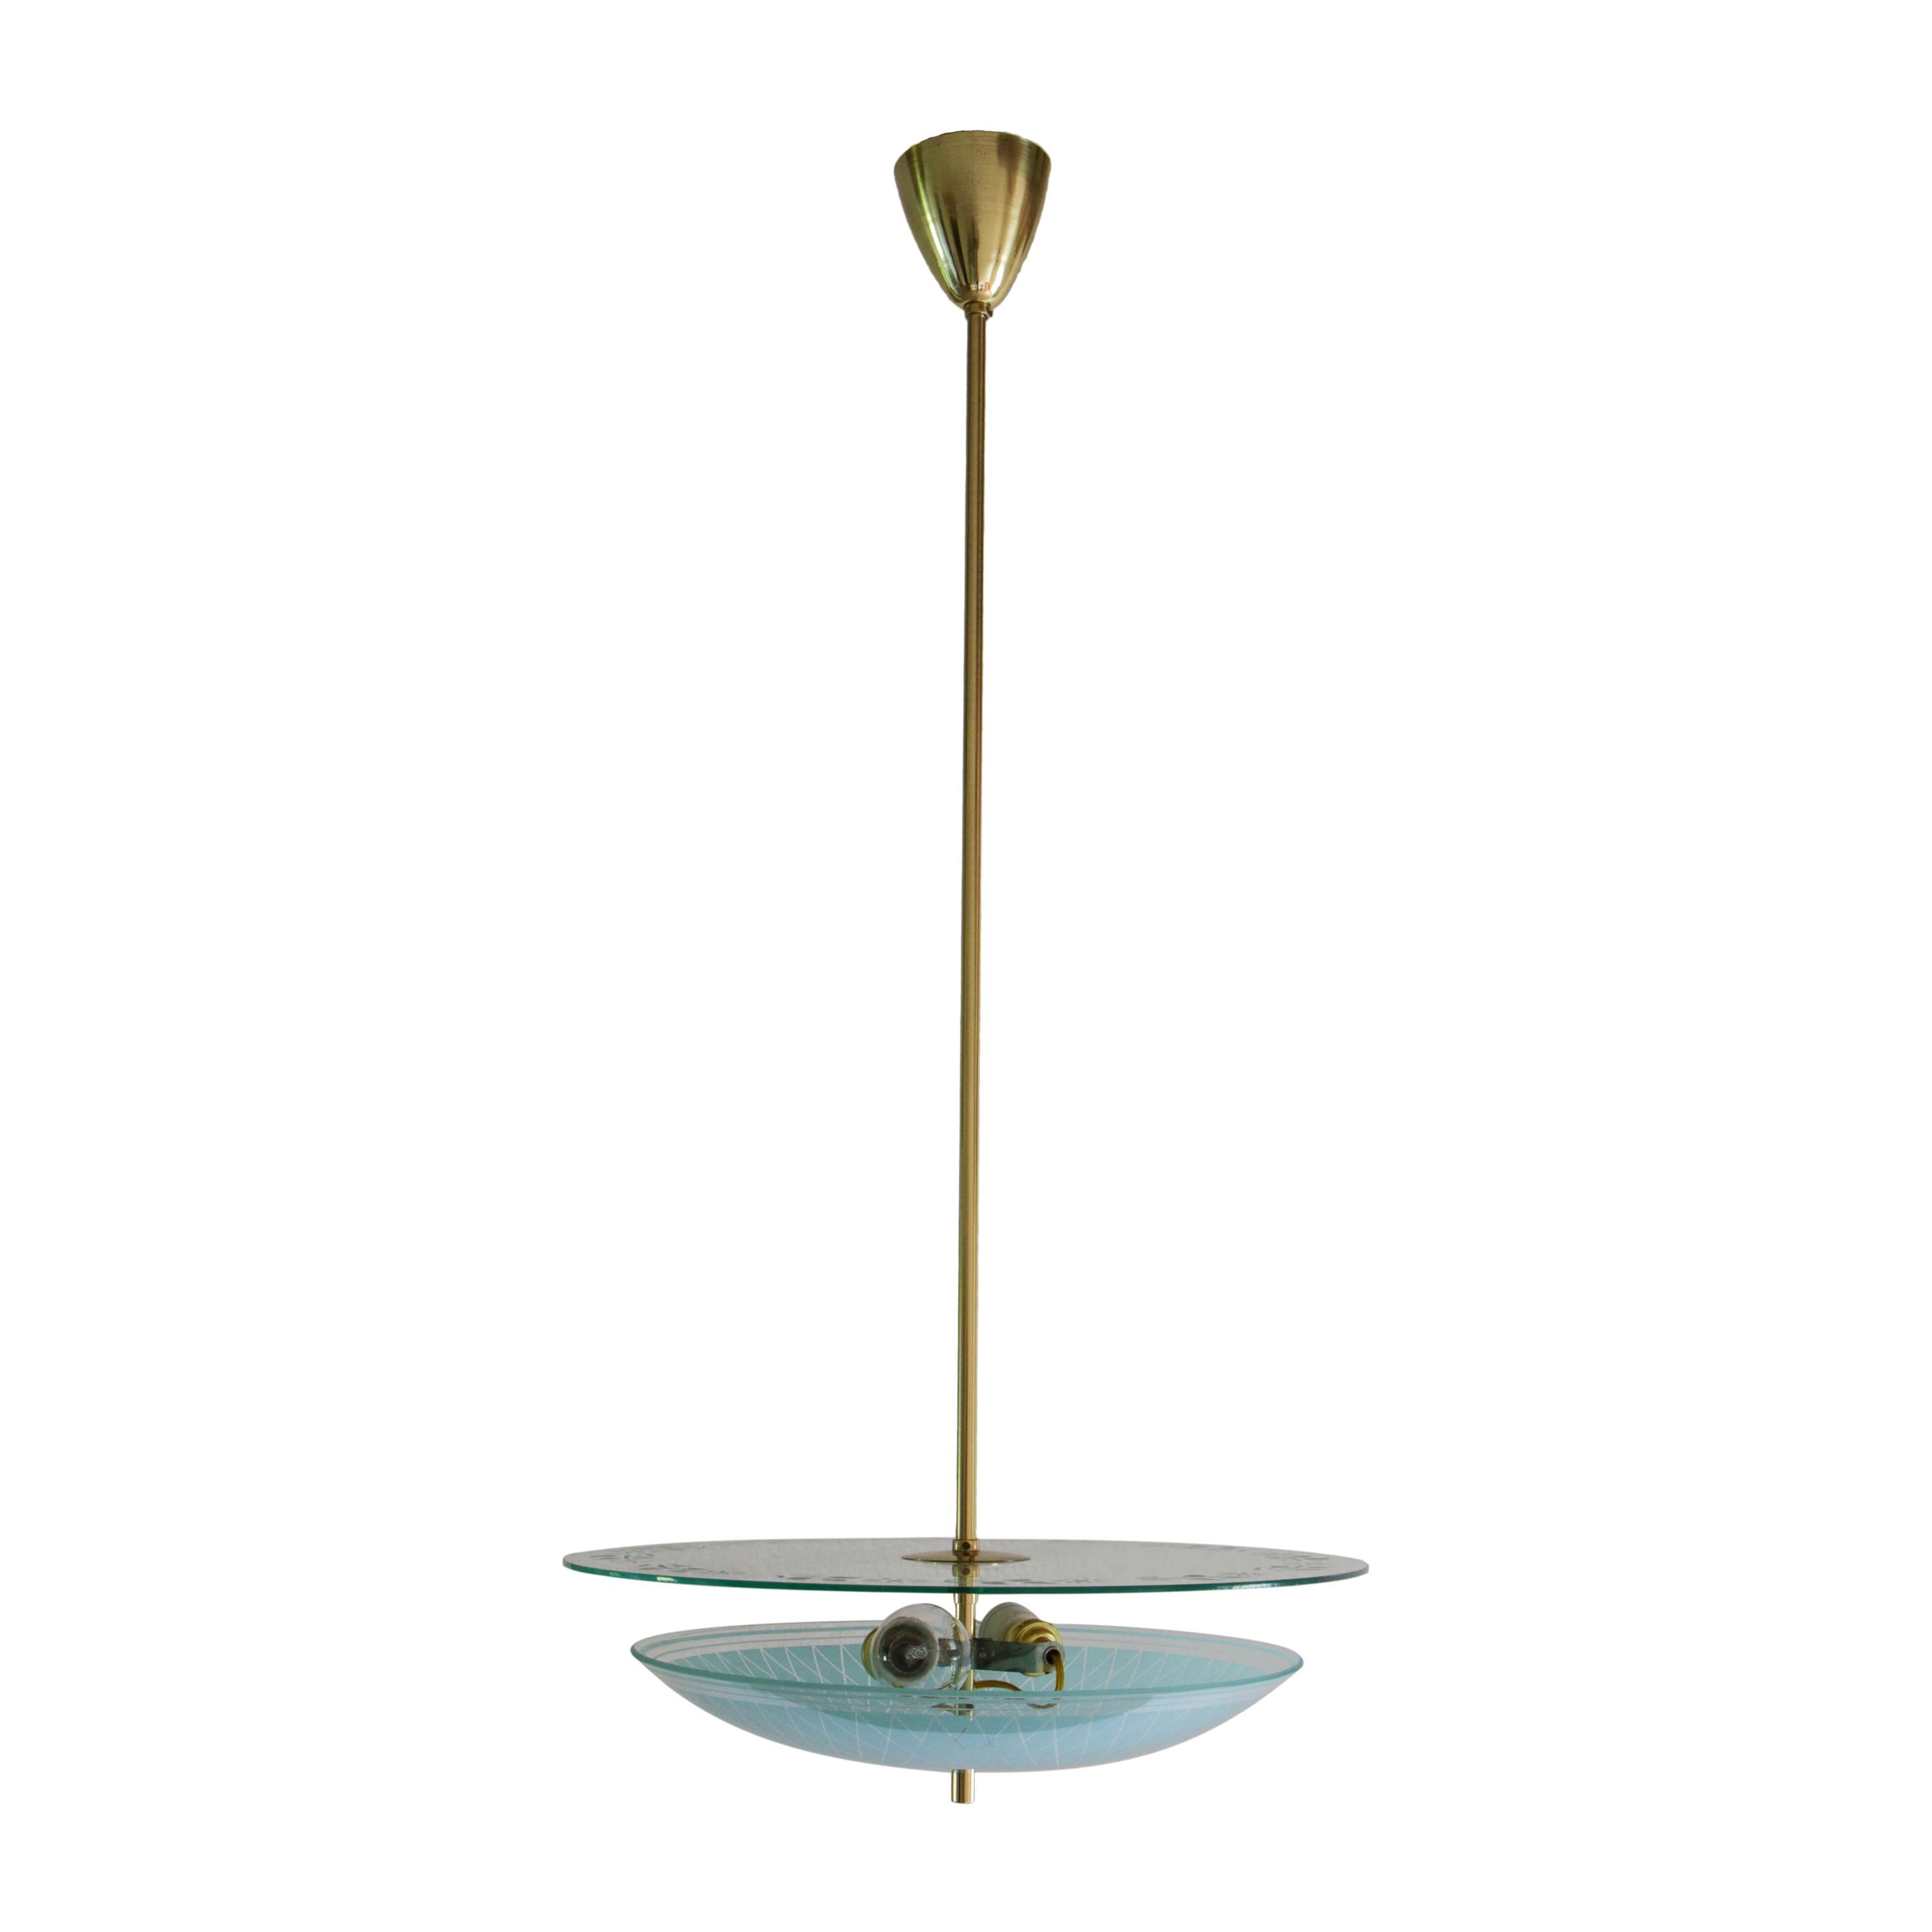 Italian Mid-Century Modern double disc pendant lamp in turquoise color, 1950.
Polished brass structure, curved silkscreen printed glass, and transparent flat glass with frosted floral print. 
The restoration was made with great care by a